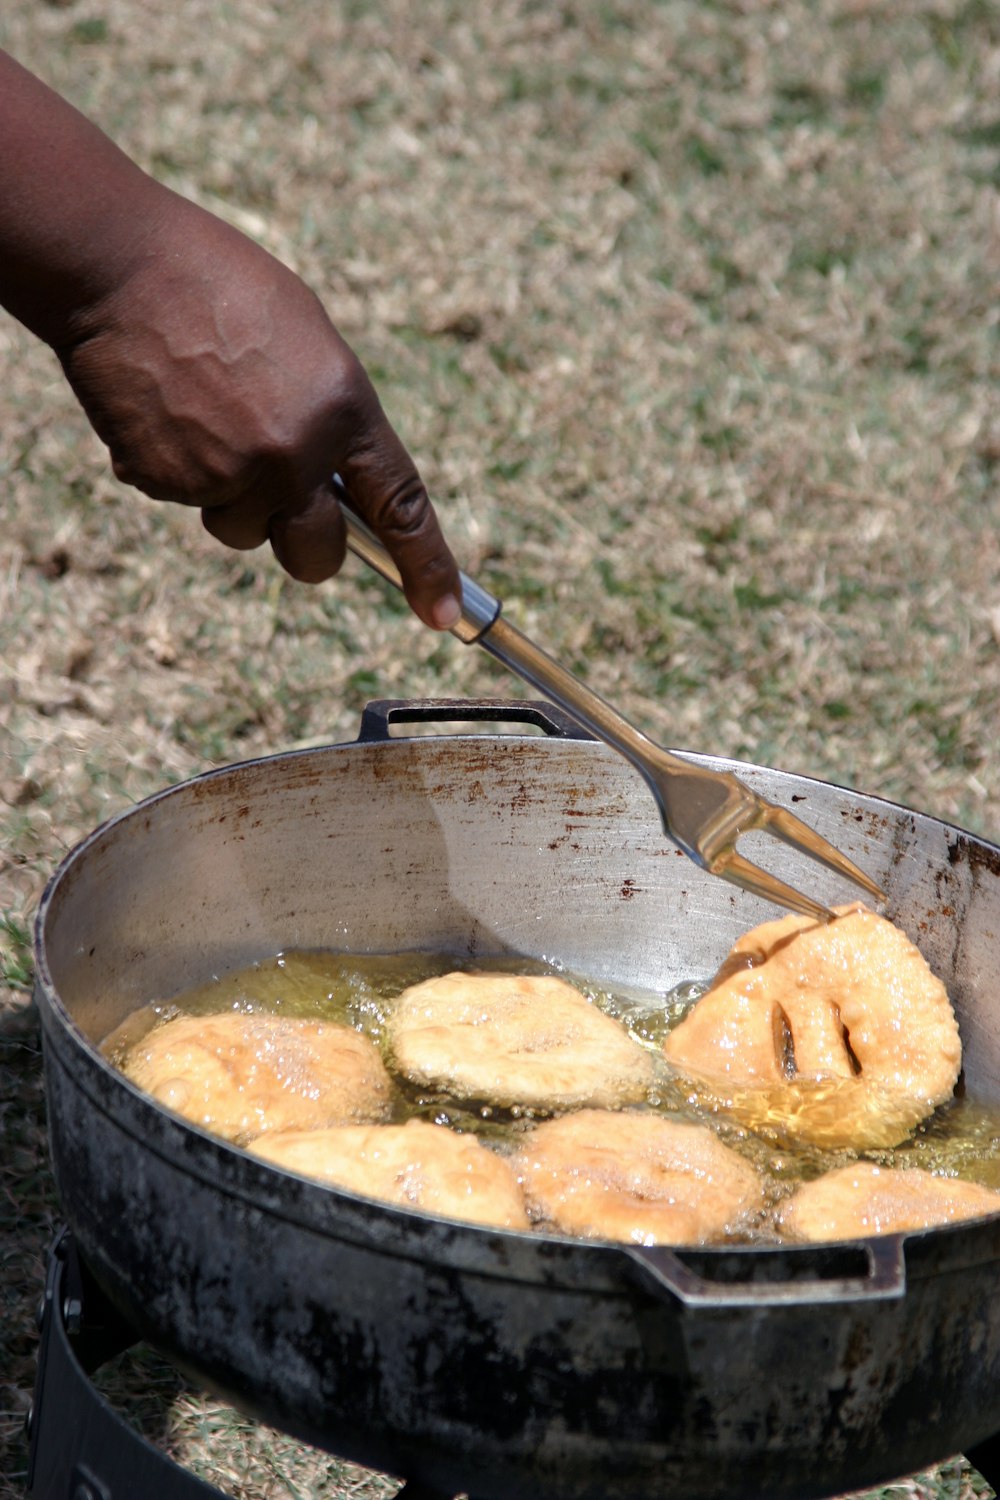 a person is frying donuts in a pan